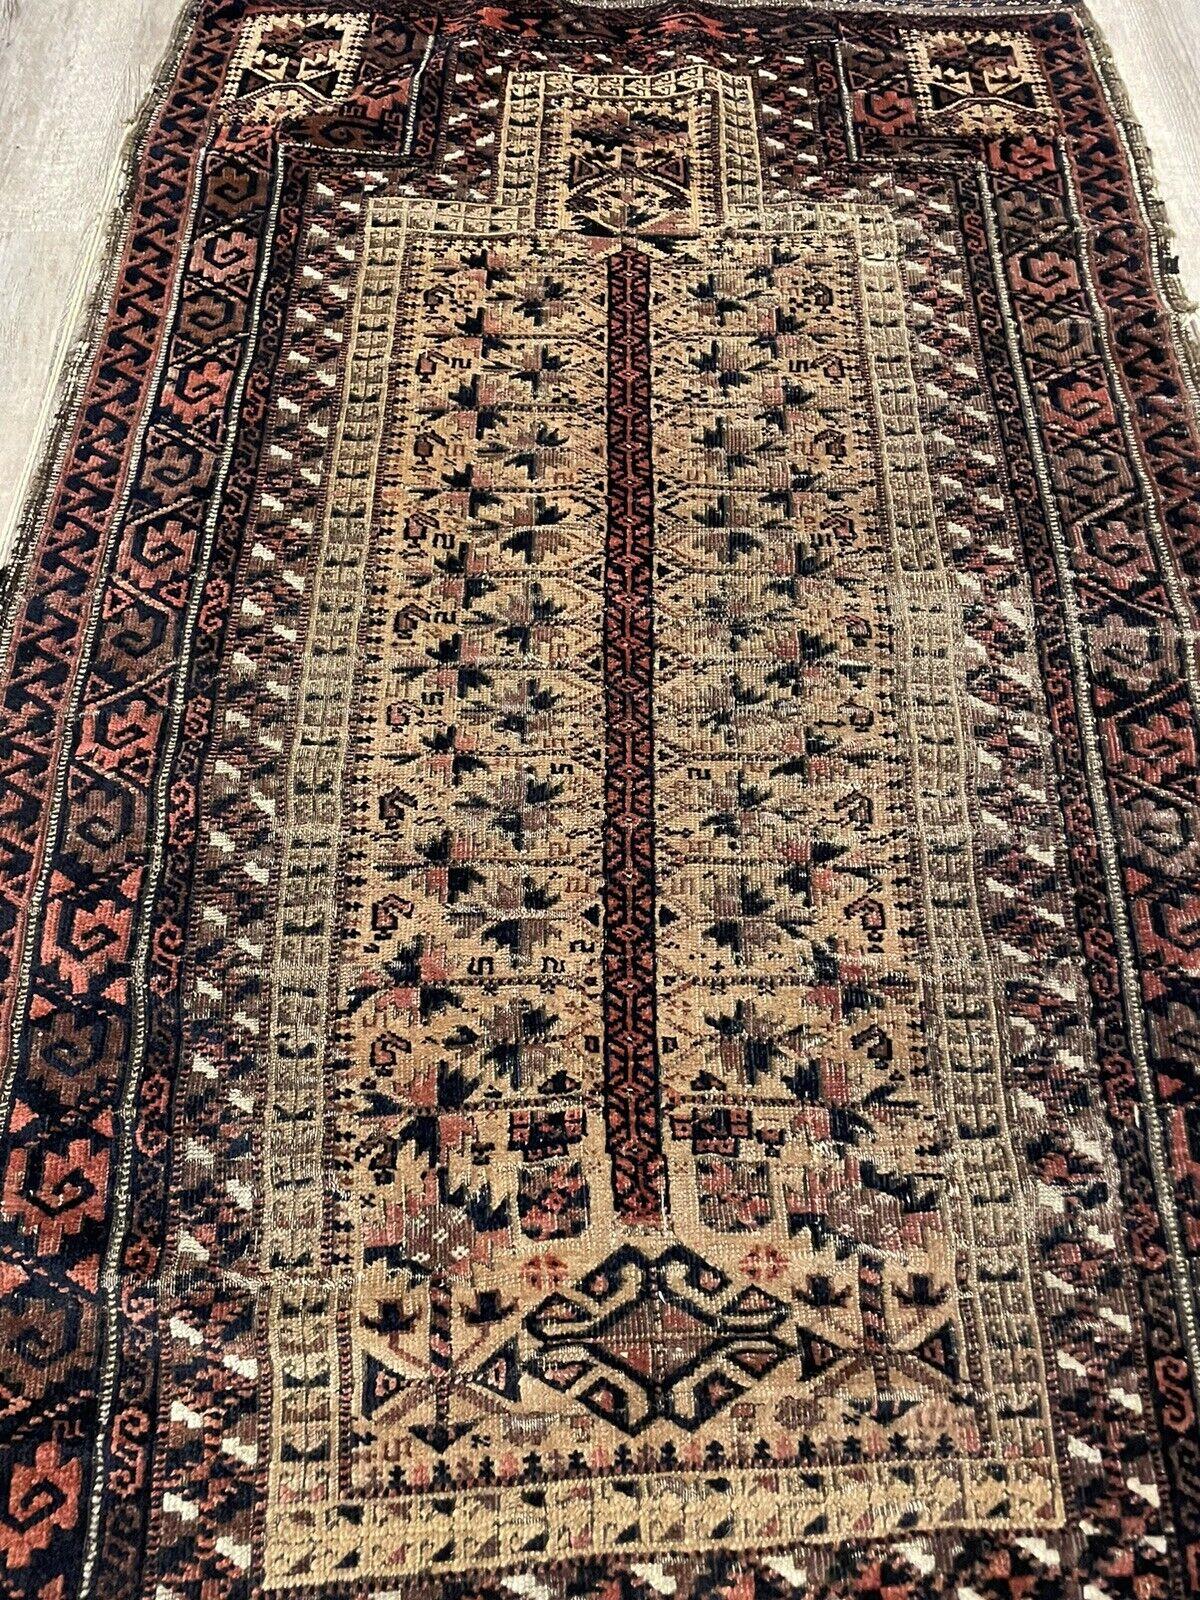 Handmade Antique Afghan Baluch Collectible Rug 2.5' x 4.6', 1880s - 1N18 For Sale 2